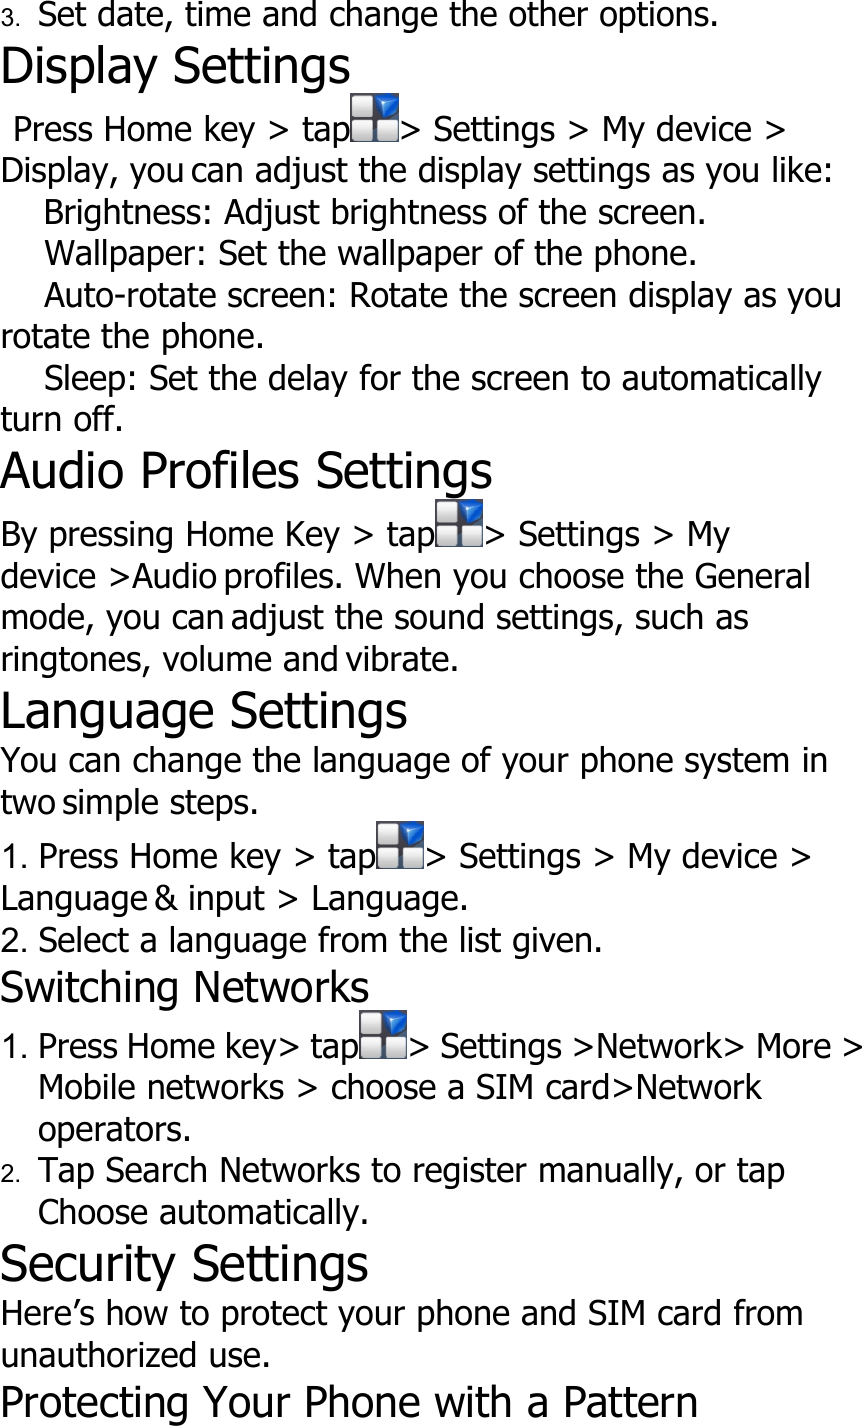 3. Set date, time and change the other options.Display SettingsPress Home key &gt; tap &gt; Settings &gt; My device &gt;Display, you can adjust the display settings as you like:Brightness: Adjust brightness of the screen.Wallpaper: Set the wallpaper of the phone.Auto-rotate screen: Rotate the screen display as yourotate the phone.Sleep: Set the delay for the screen to automaticallyturn off.Audio Profiles SettingsBy pressing Home Key &gt; tap &gt; Settings &gt; Mydevice &gt;Audio profiles. When you choose the Generalmode, you can adjust the sound settings, such asringtones, volume and vibrate.Language SettingsYou can change the language of your phone system intwo simple steps.1. Press Home key &gt; tap &gt; Settings &gt; My device &gt;Language &amp; input &gt; Language.2. Select a language from the list given.Switching Networks1. Press Home key&gt; tap &gt; Settings &gt;Network&gt; More &gt;Mobile networks &gt; choose a SIM card&gt;Networkoperators.2. Tap Search Networks to register manually, or tapChoose automatically.Security SettingsHere’s how to protect your phone and SIM card fromunauthorized use.Protecting Your Phone with a Pattern